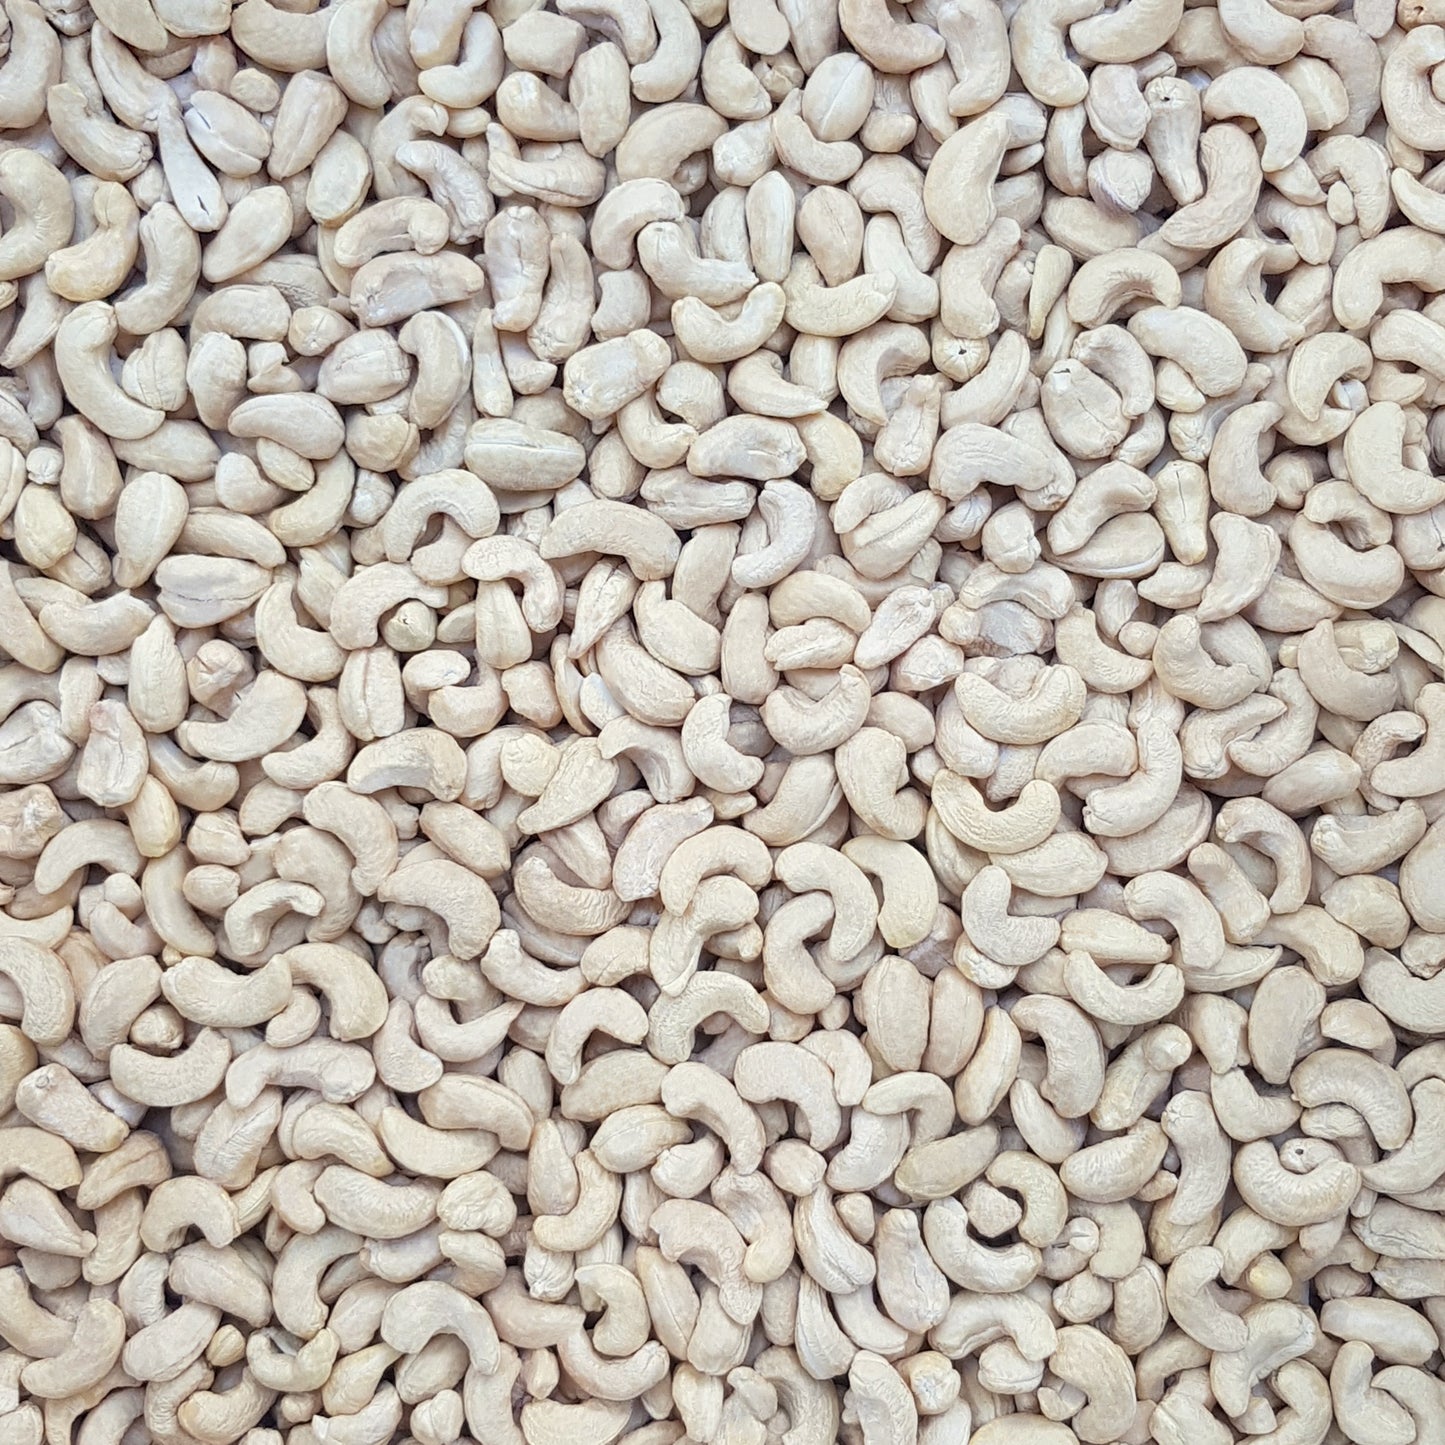 Full frame overhead image of BY NATURE Cashew Nuts - raw.